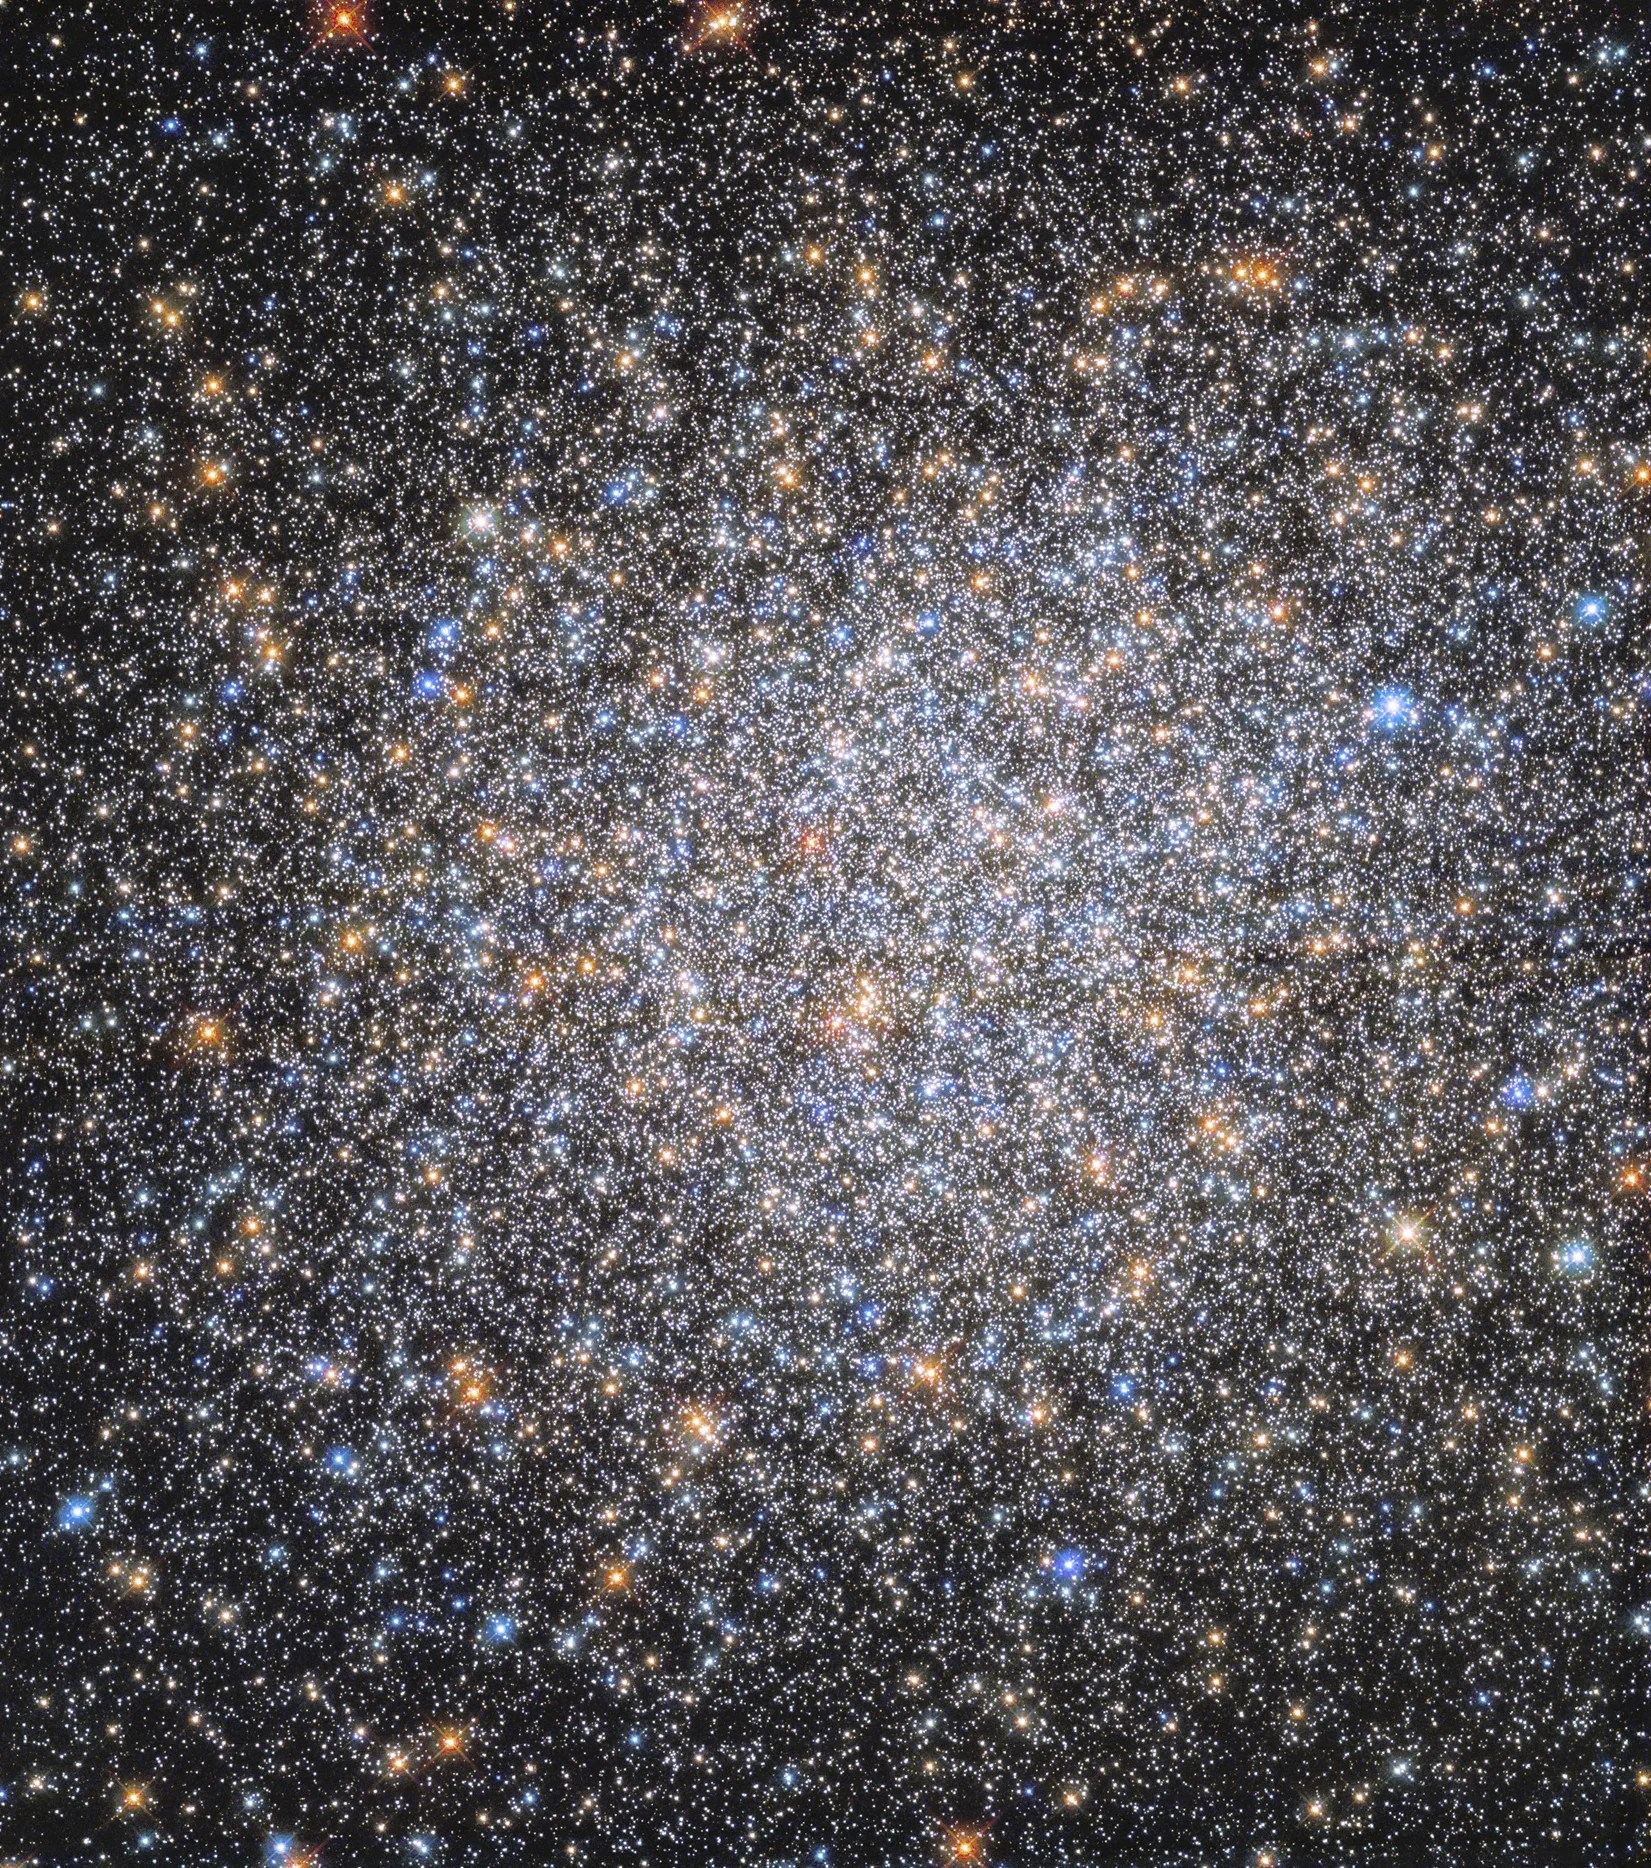 The field is filled with orange, red, yellow, blue, and white stars. They appear as a spherical, dense mass that tapers out toward the edges of the image on a black background.